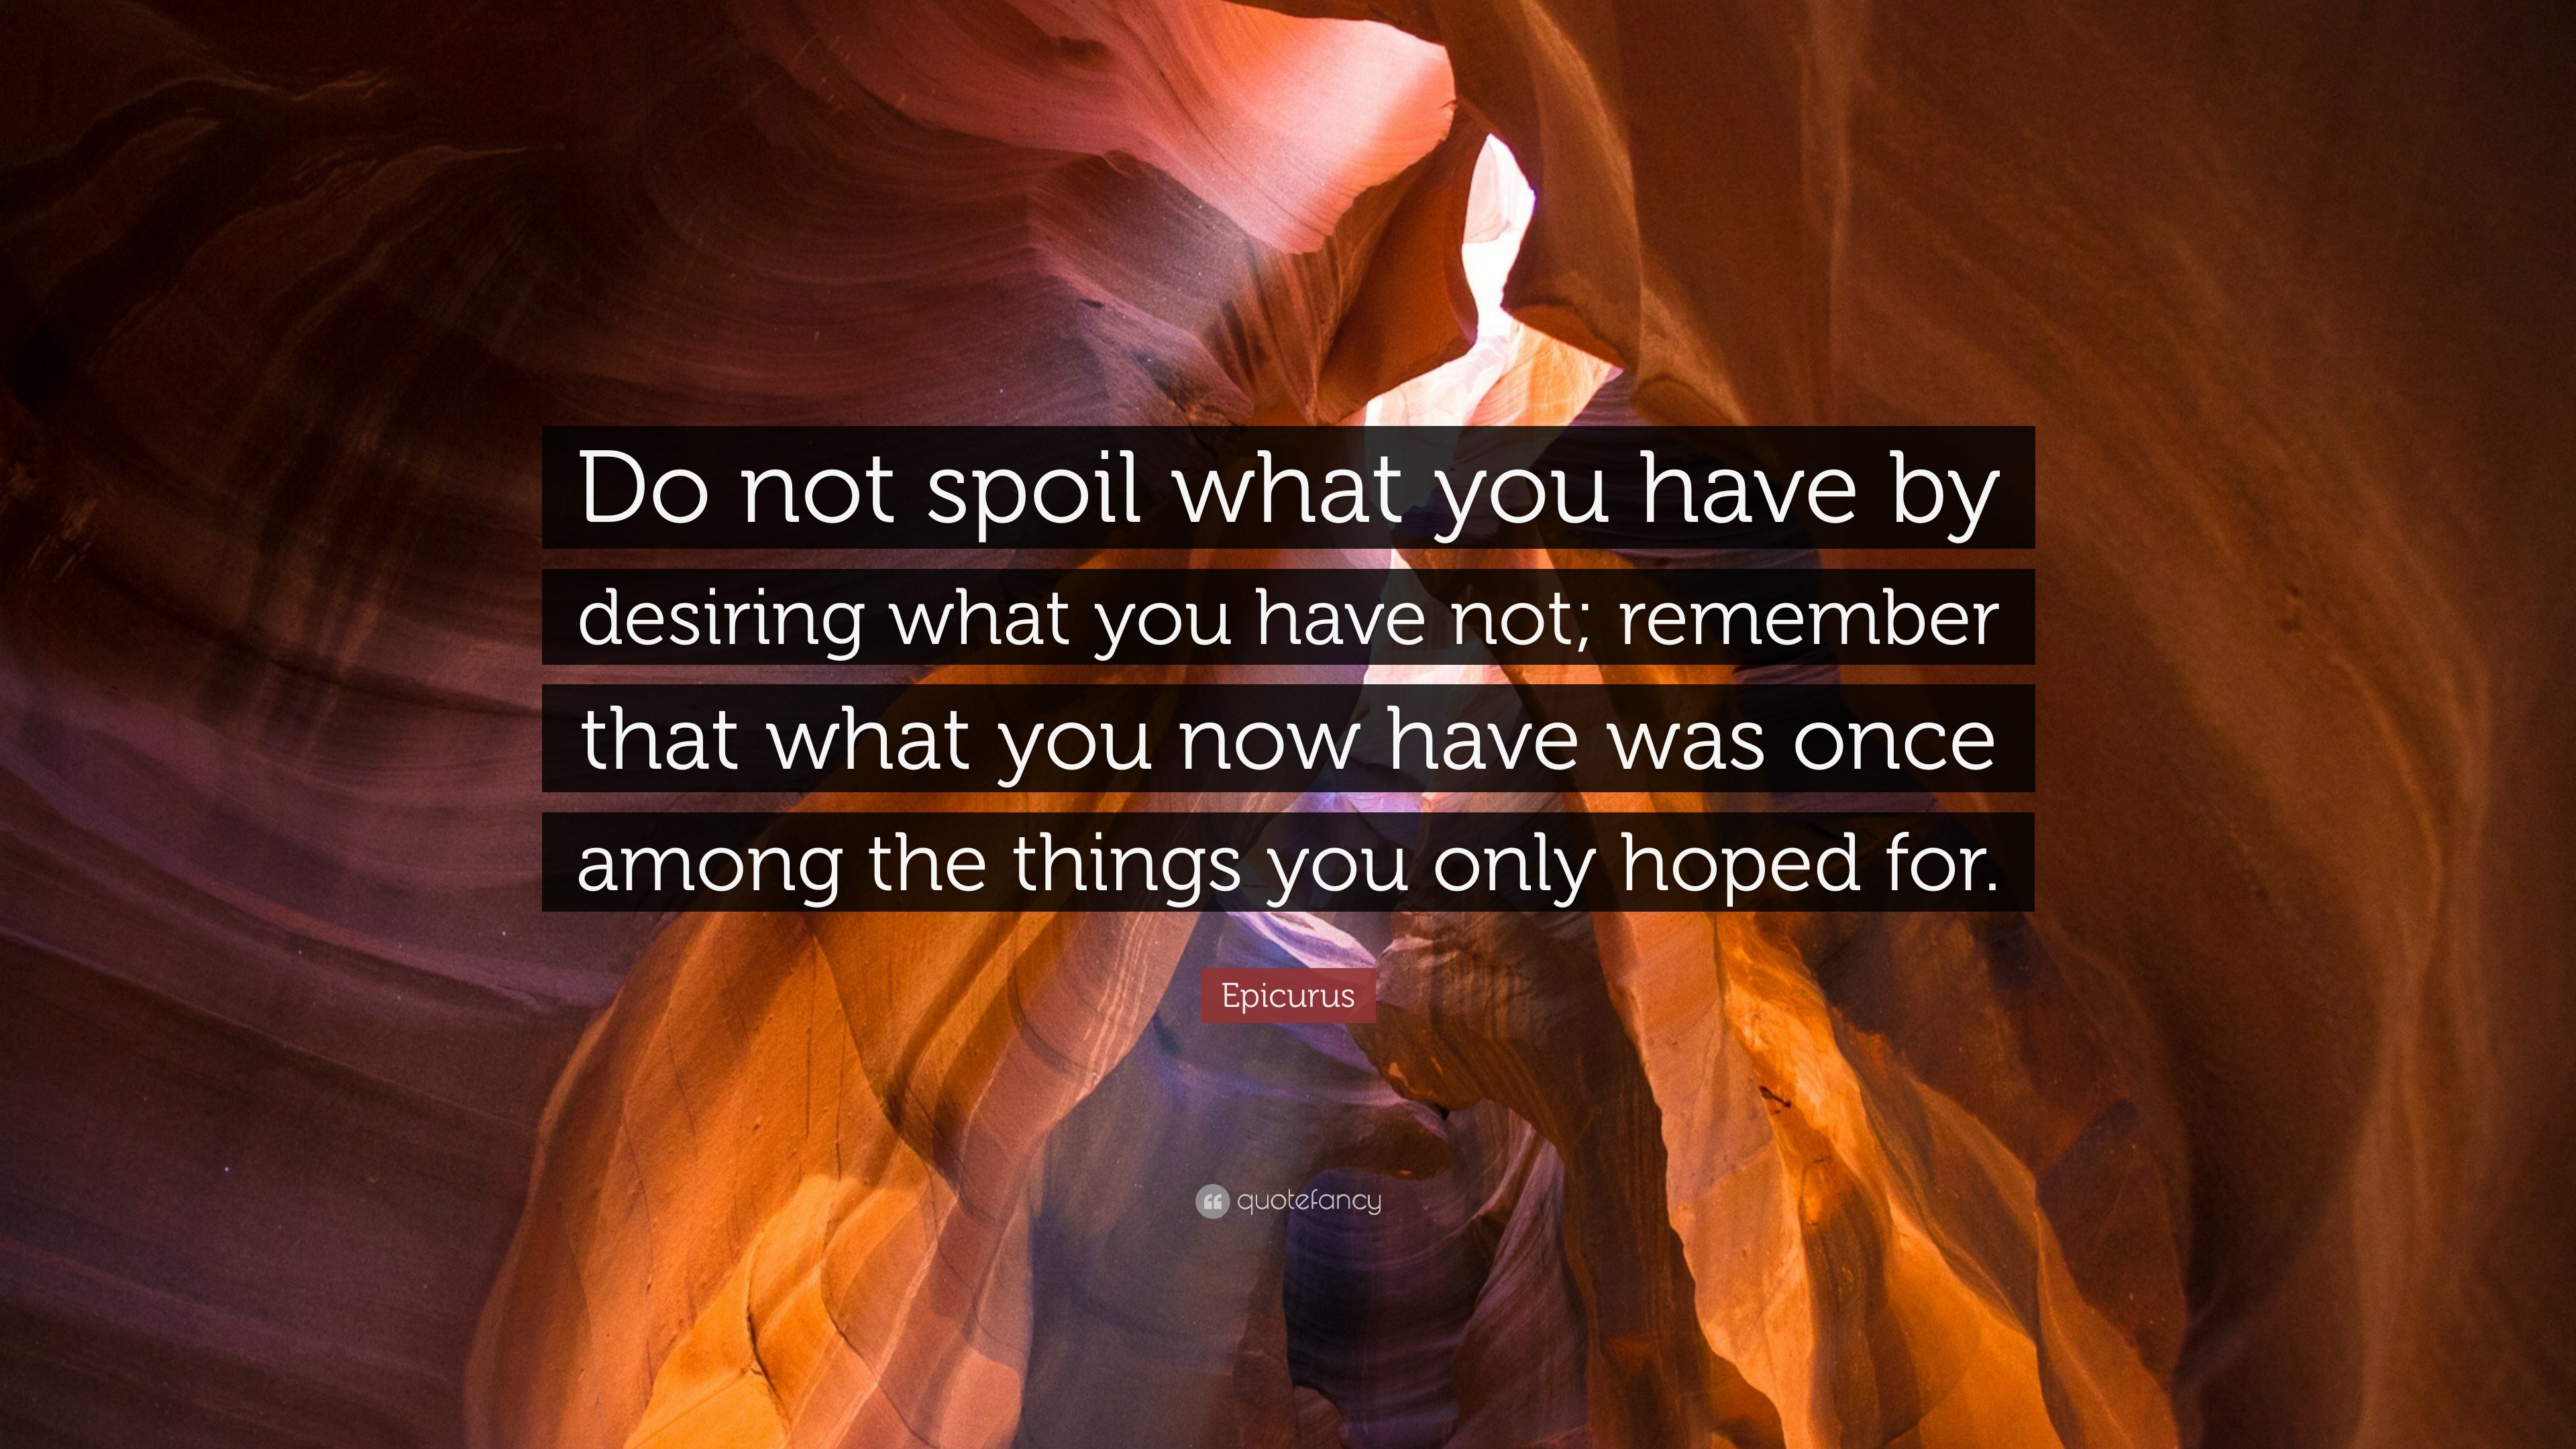 FranklinCovey - Do not spoil what you have by desiring what you